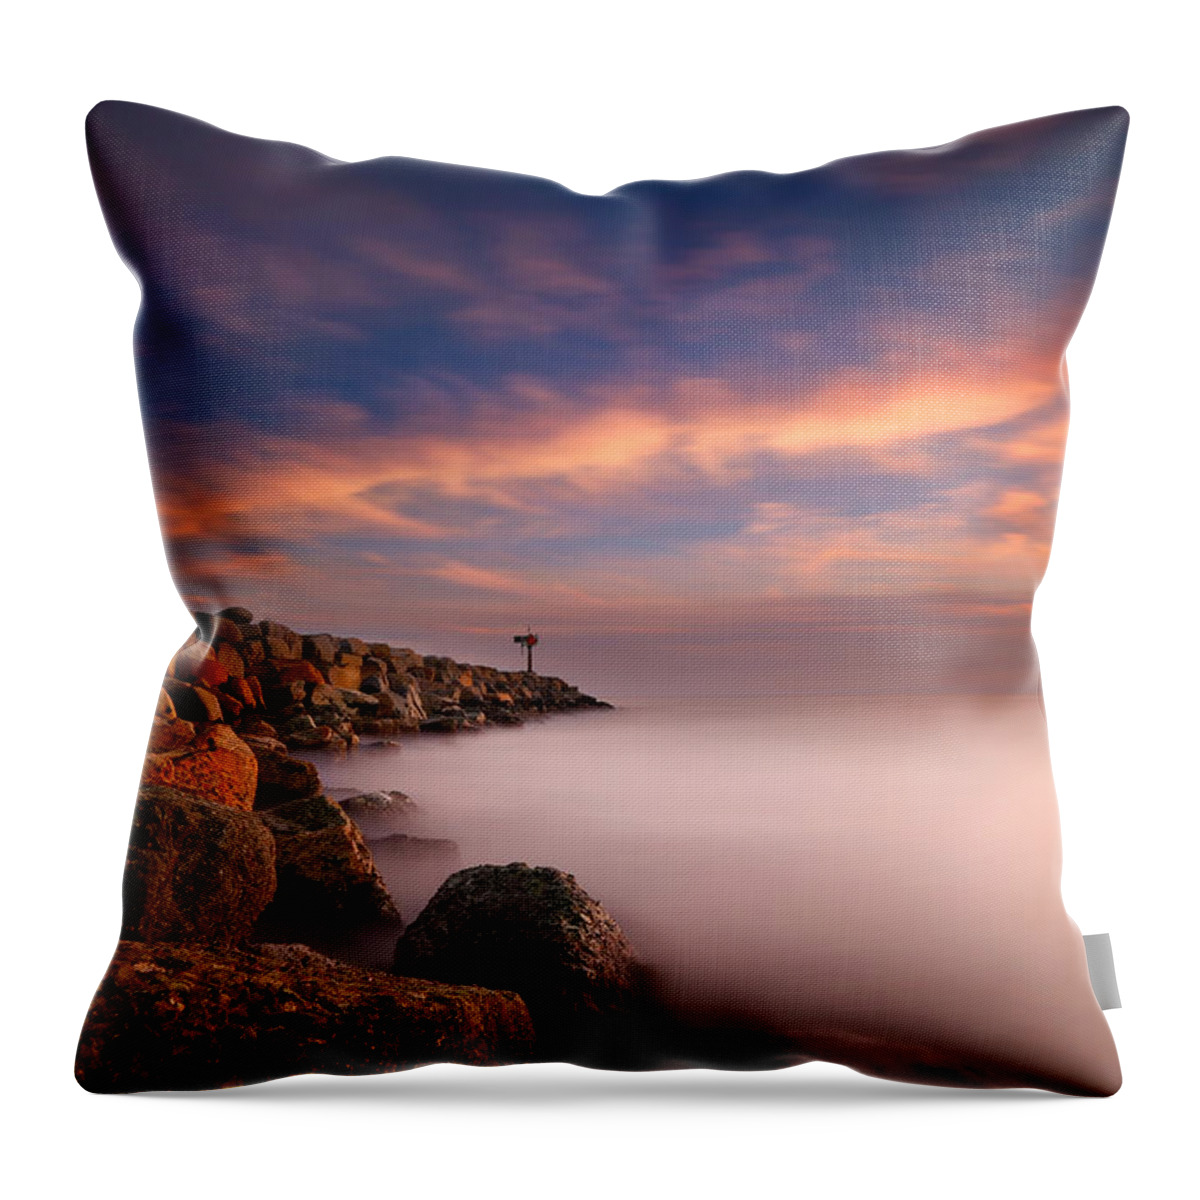 Clouds Throw Pillow featuring the photograph Oceanside Harbor Jetty Sunset 4 by Larry Marshall